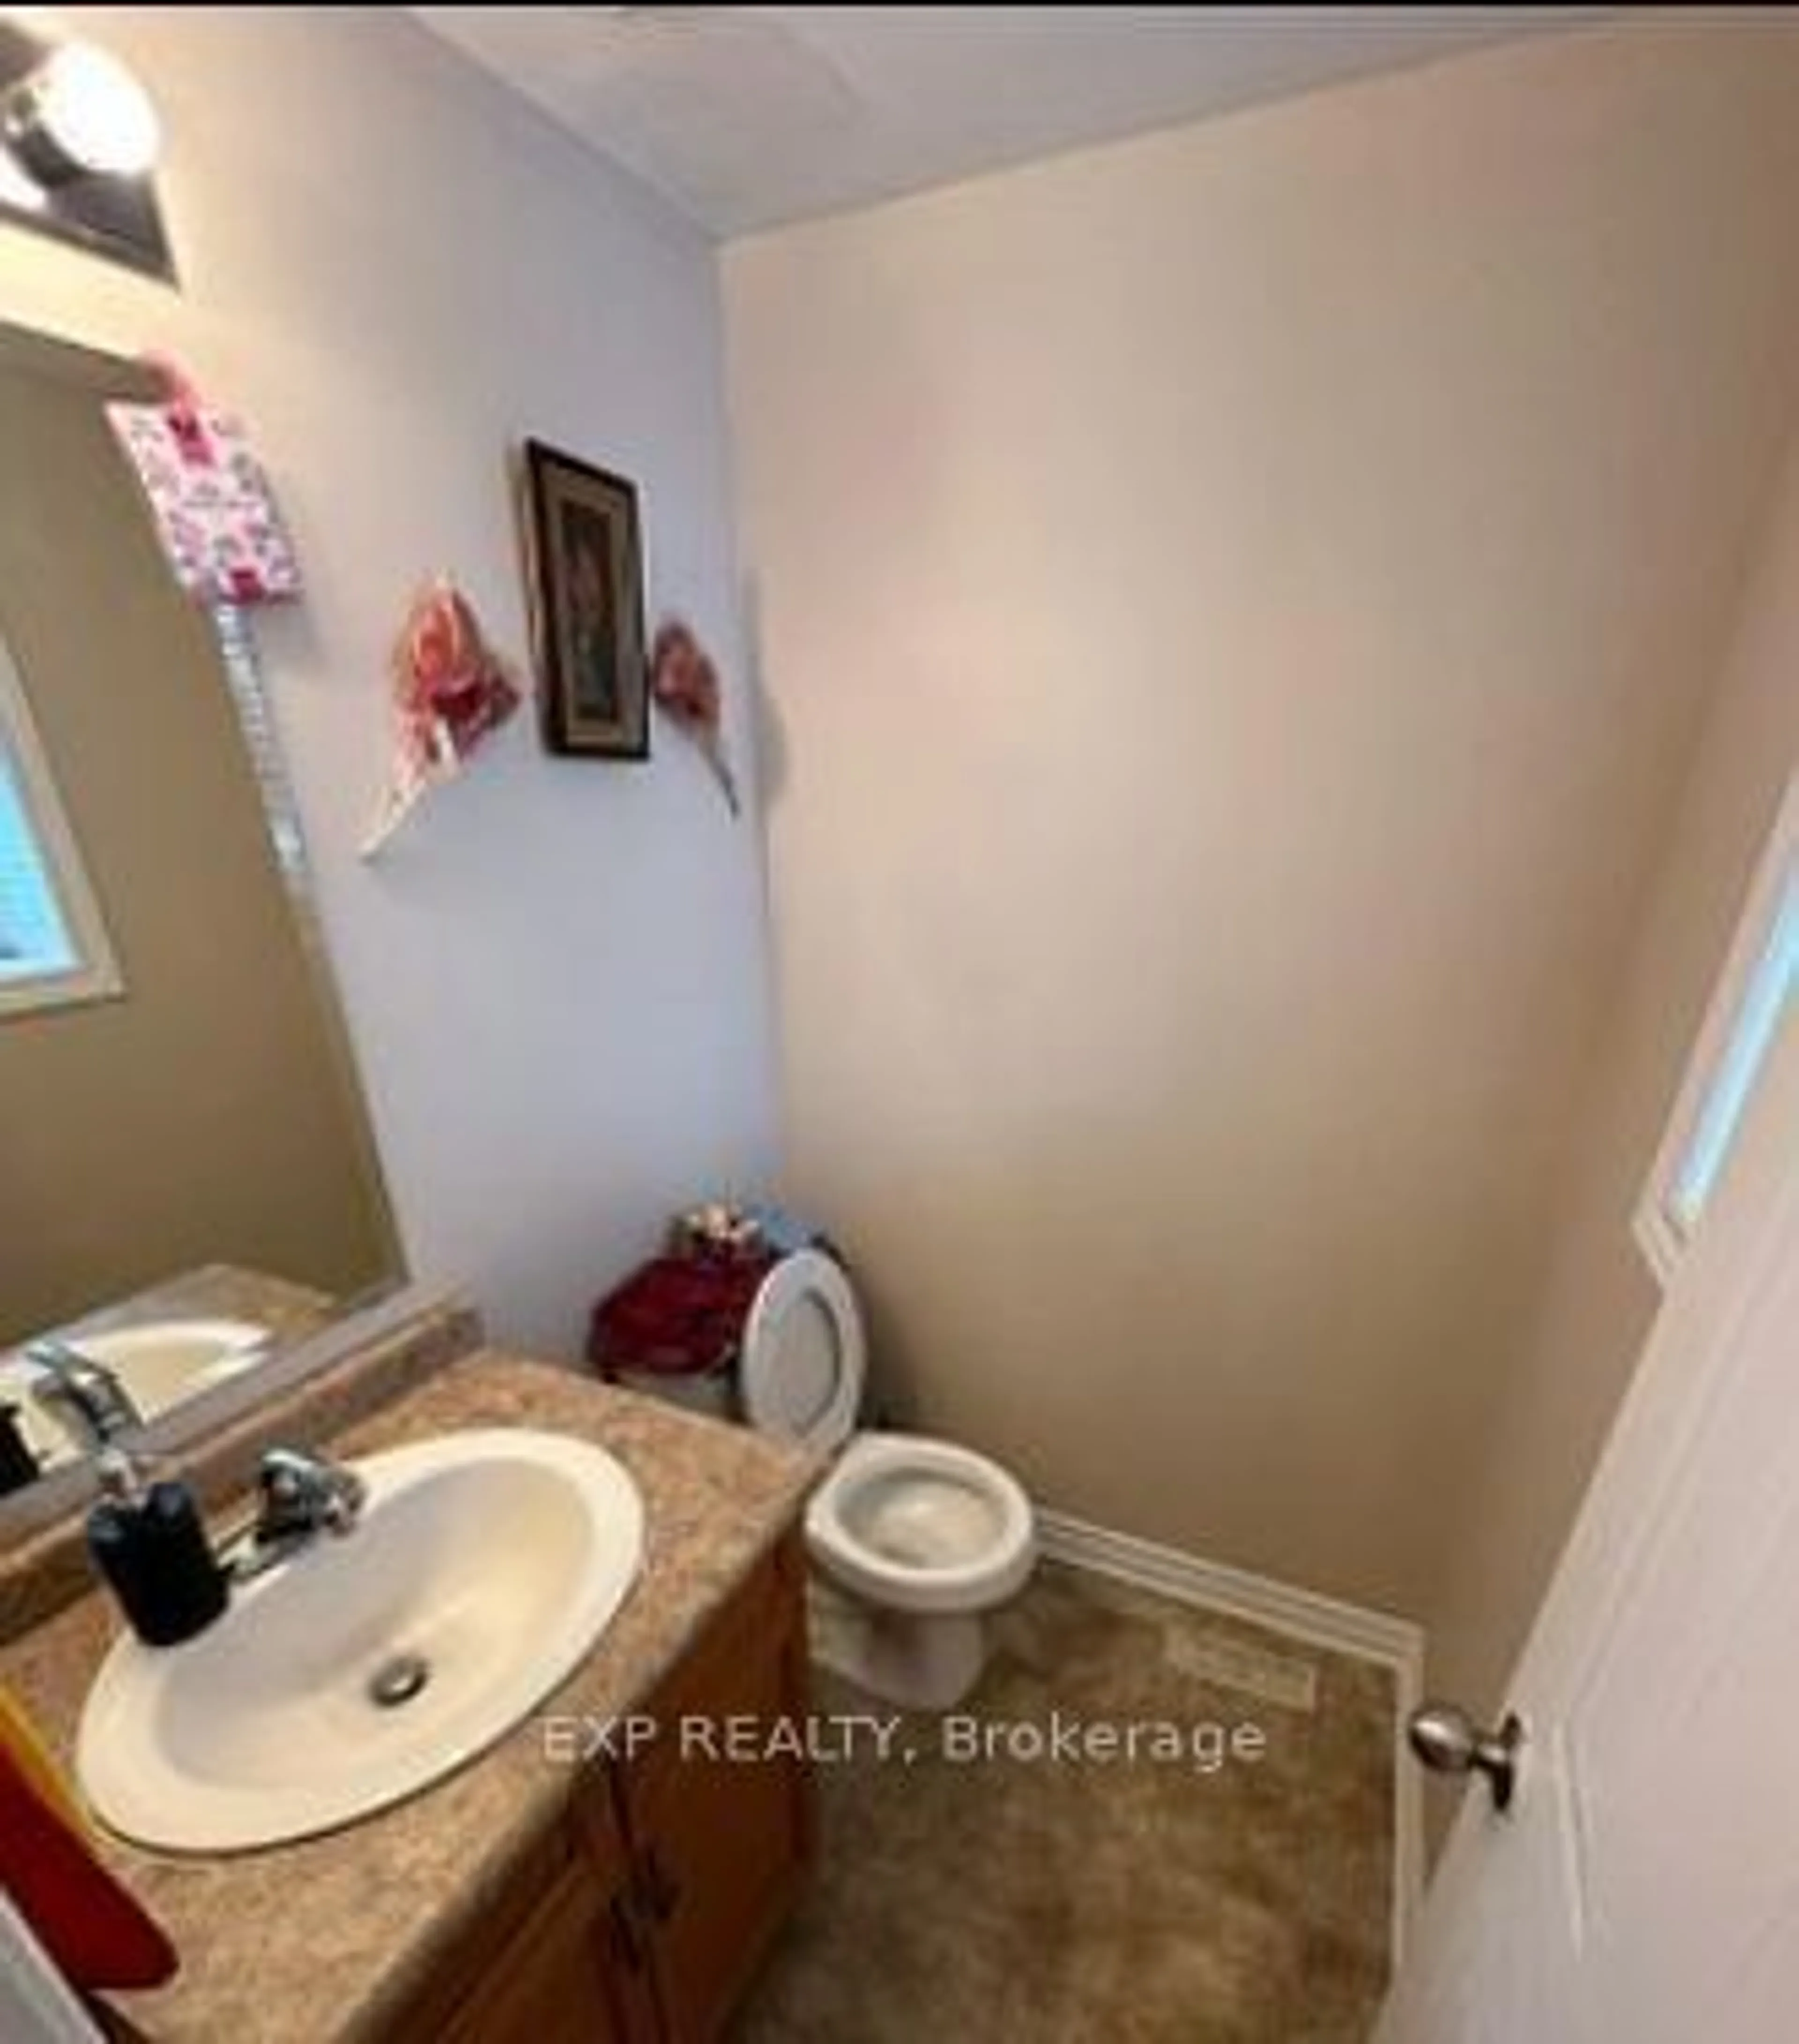 A pic of a room for 692 Oakcrossing Rd, London Ontario N6H 5V9